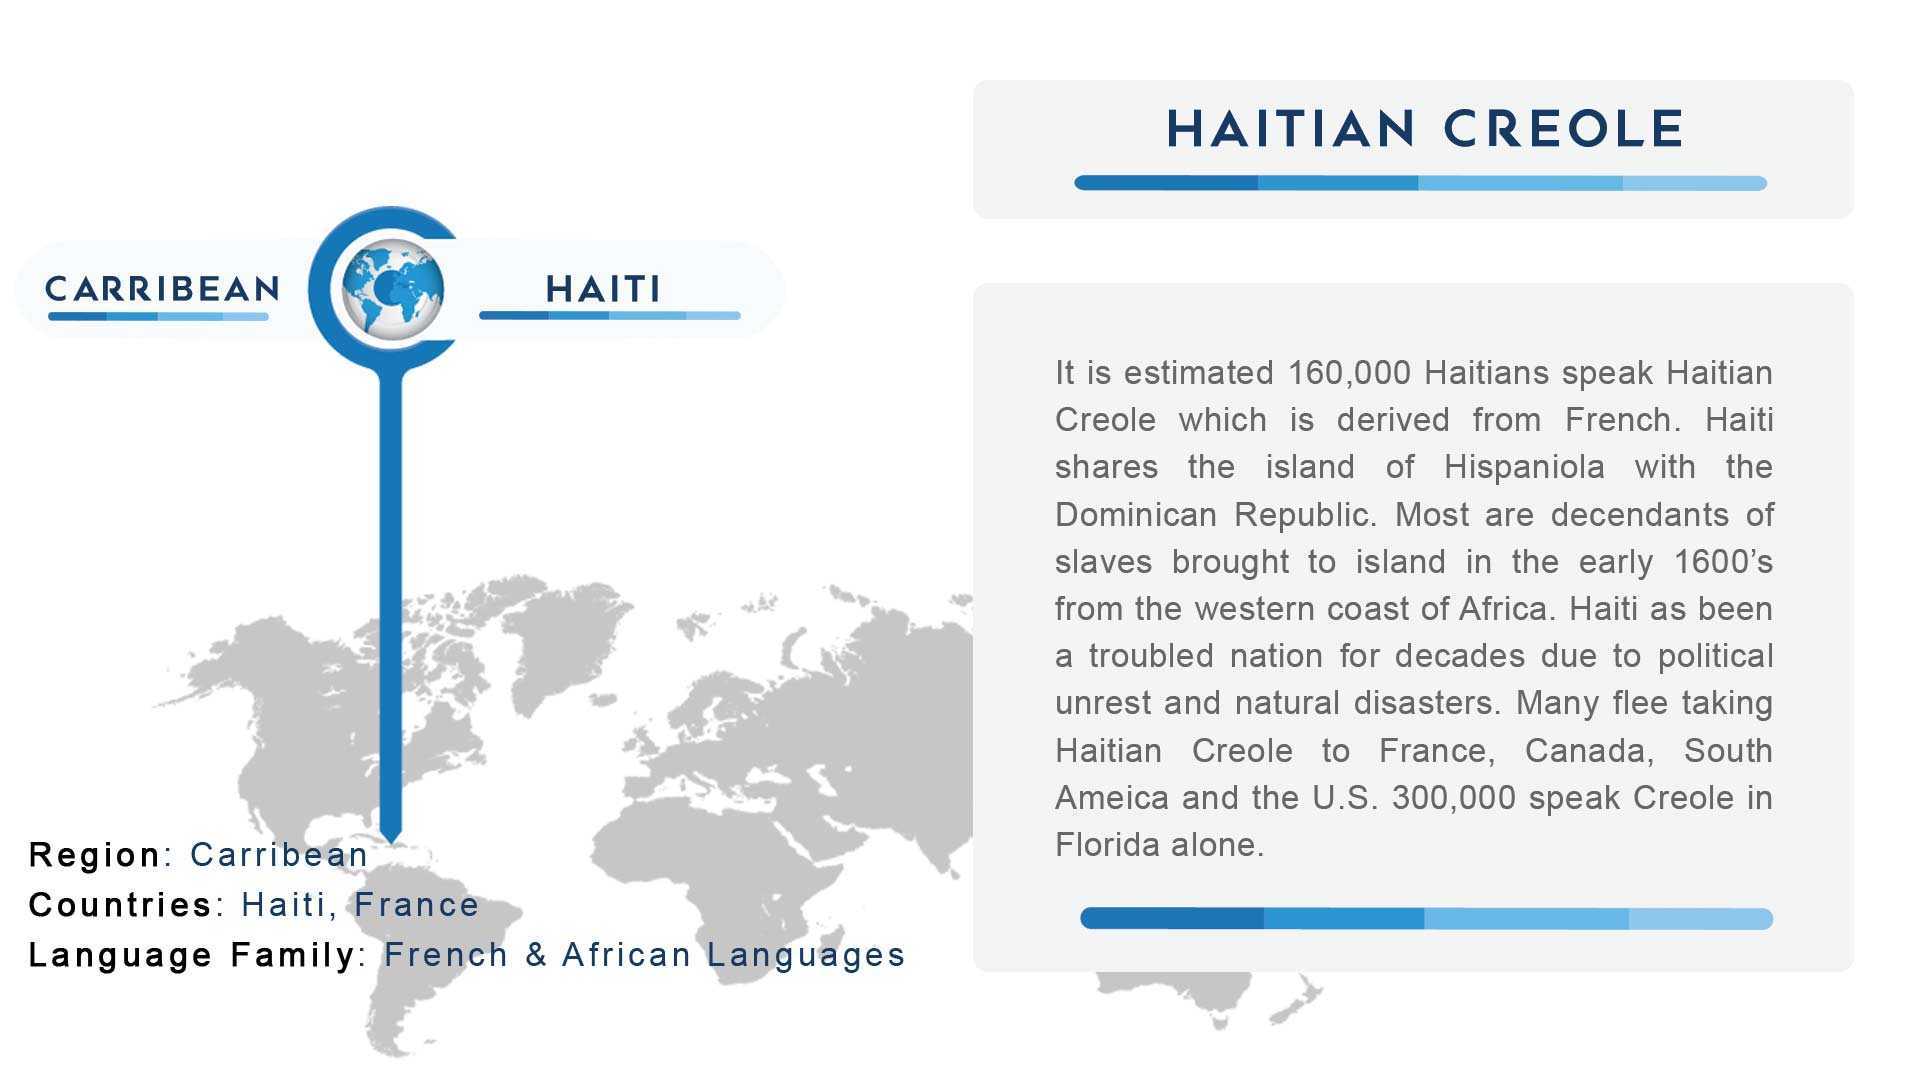 It is estimated 160,000 Haitians speak Haitian Creole which is derived from French.